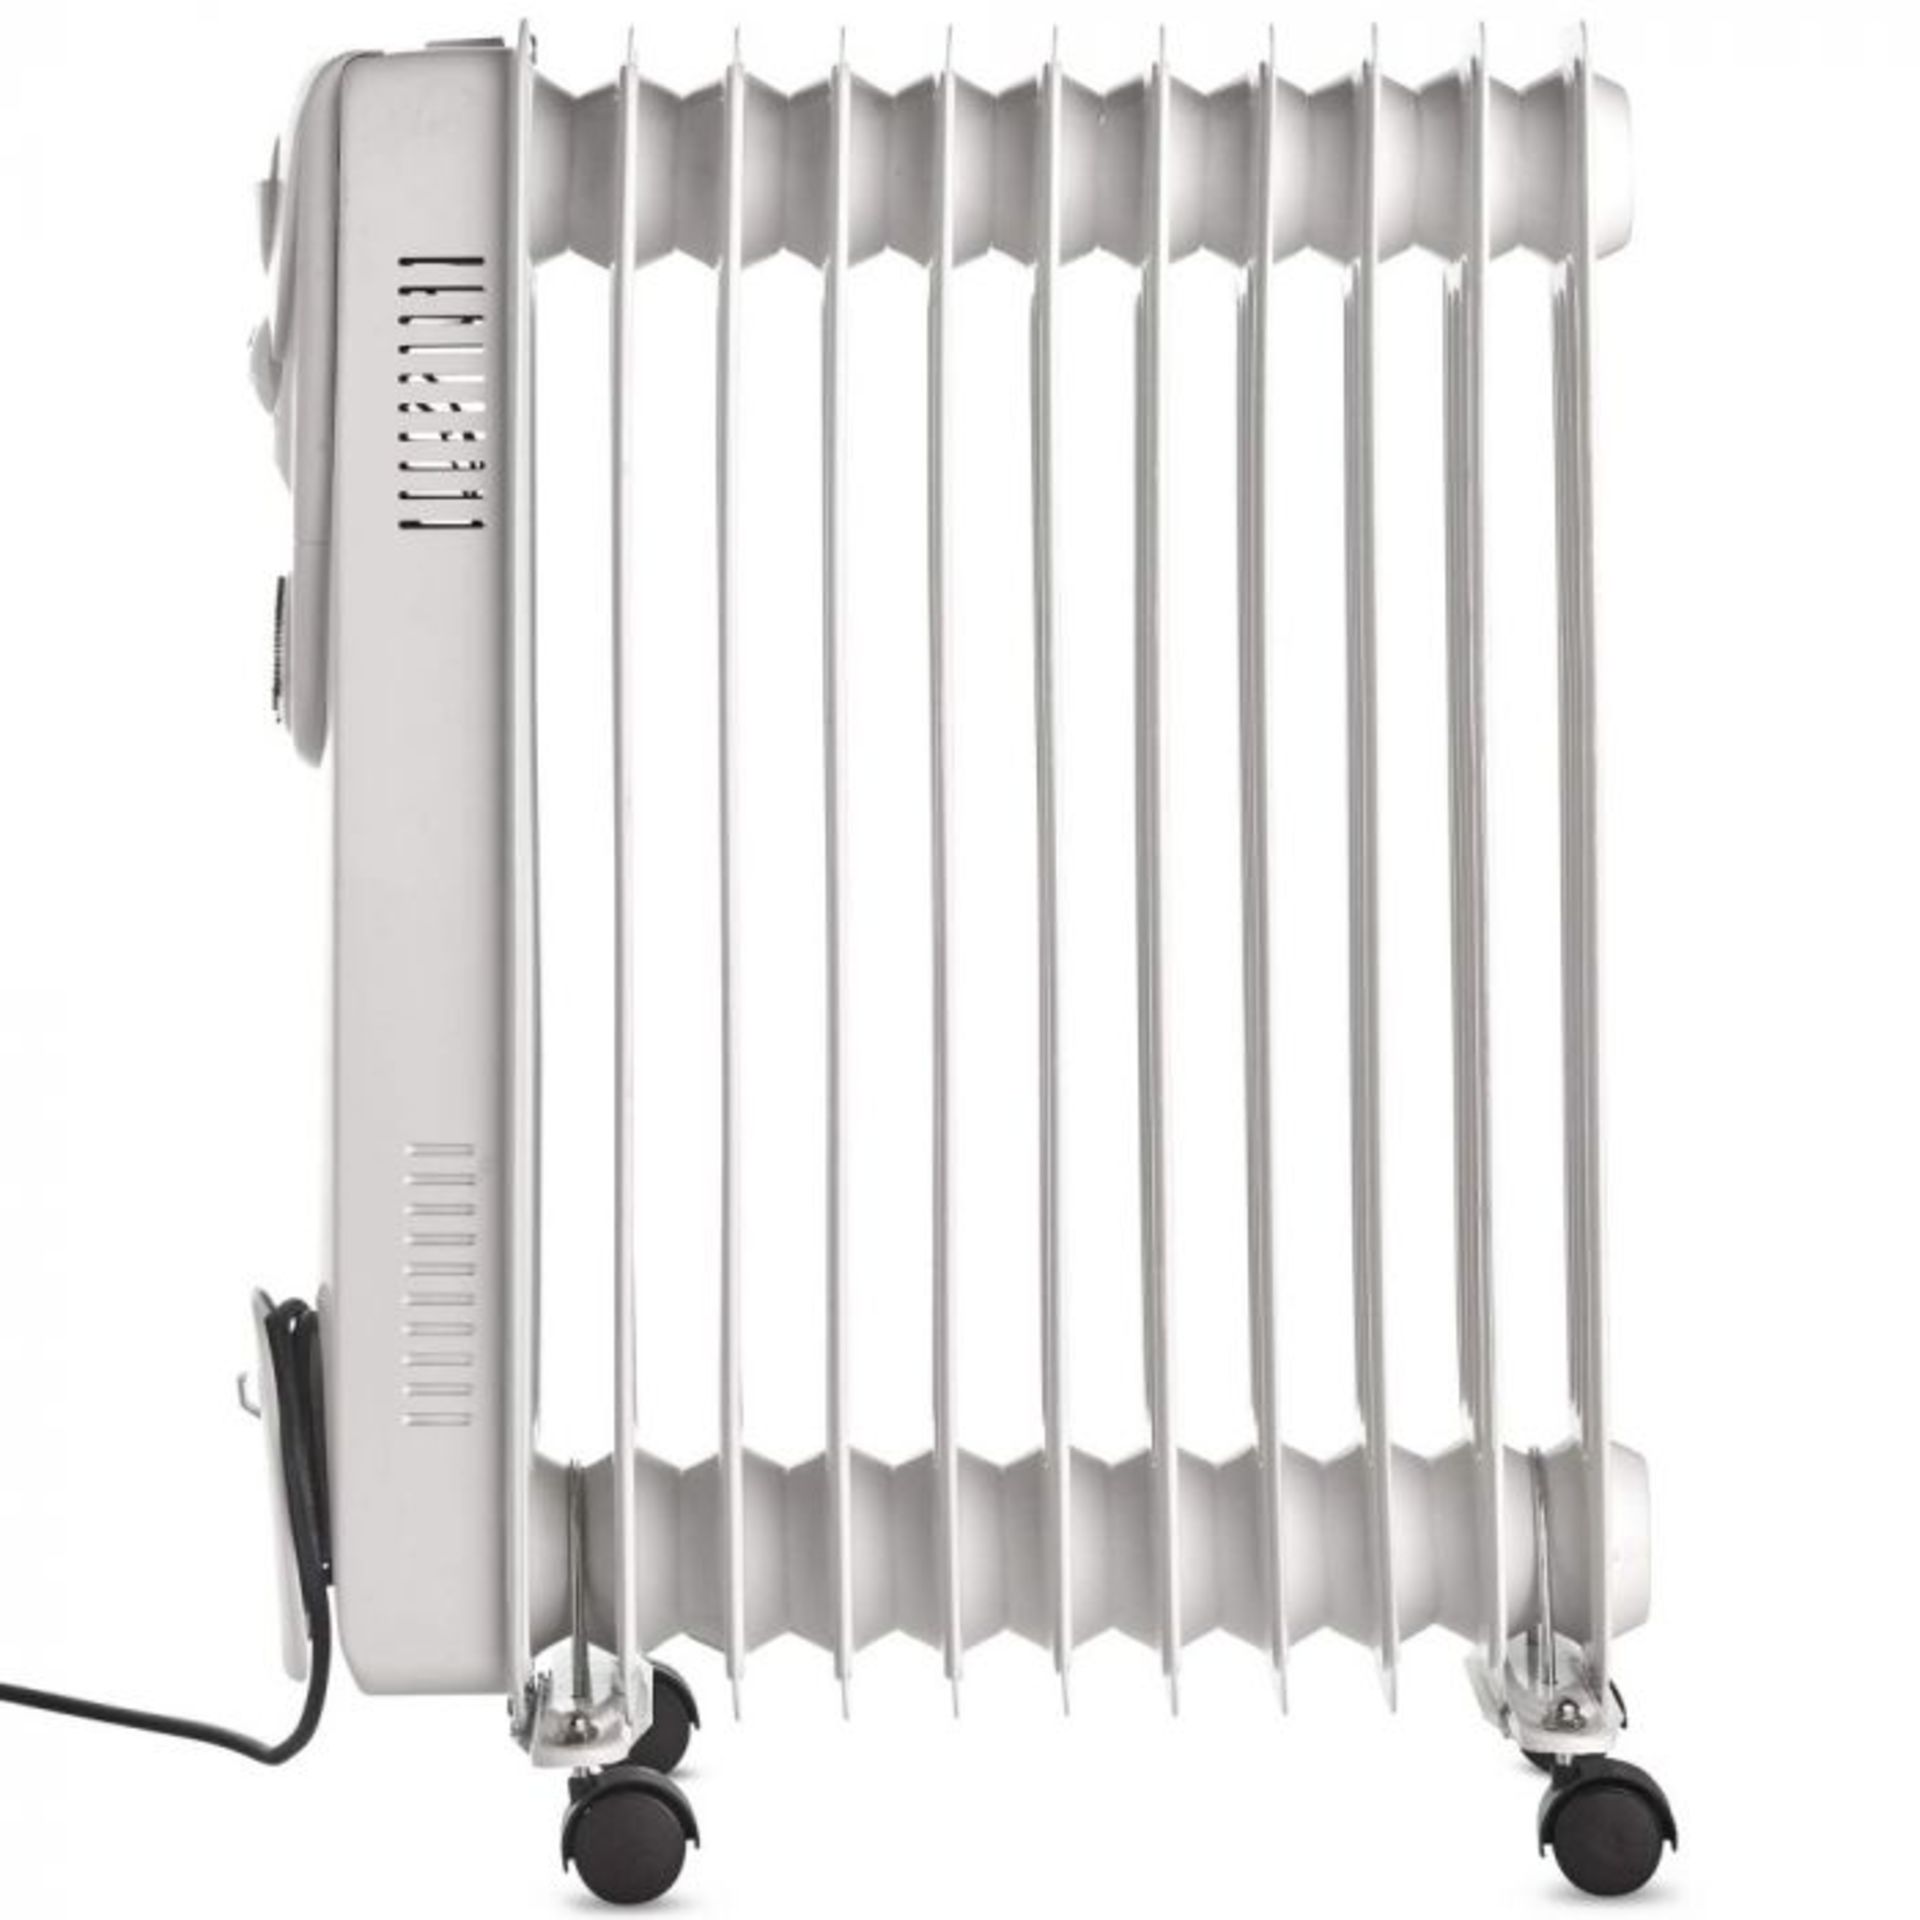 (S425) 11 Fin 2500W Oil Filled Radiator - White Suitable for areas up to 28 square metres 3 p... - Image 2 of 3